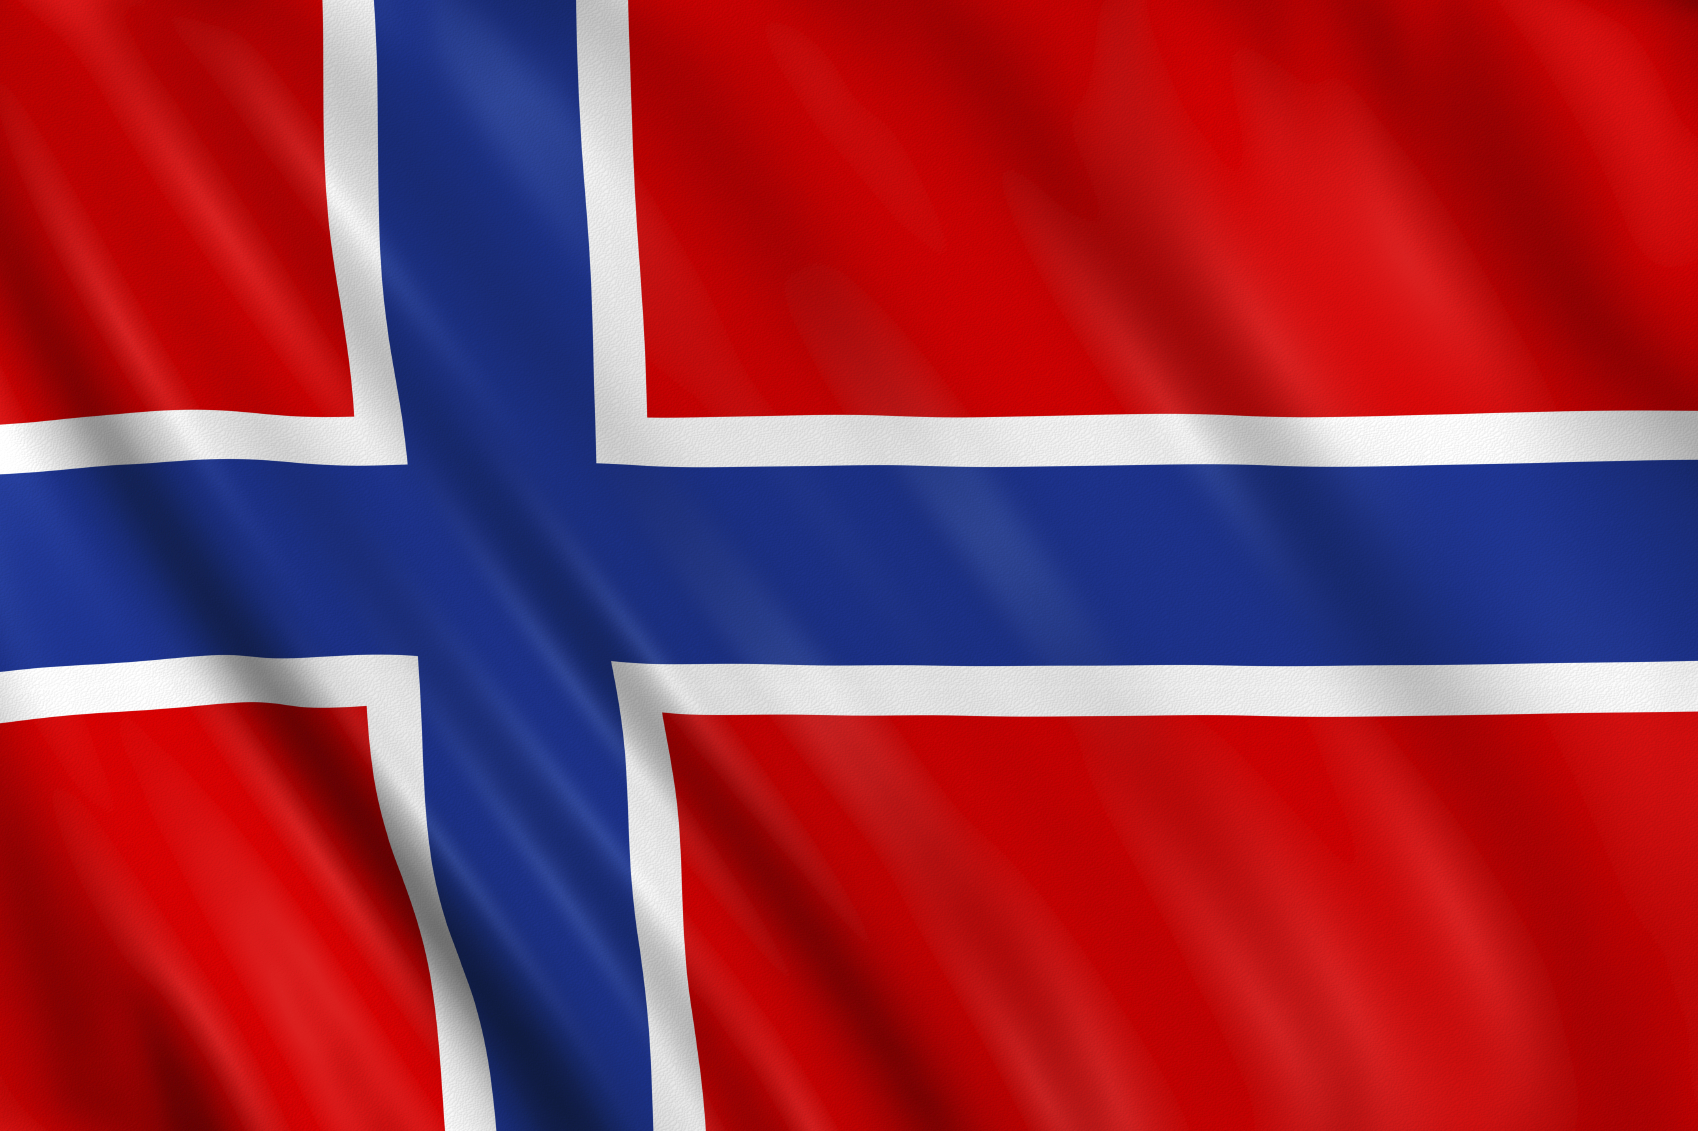 Cost savings now available, following Norway's accession to the London